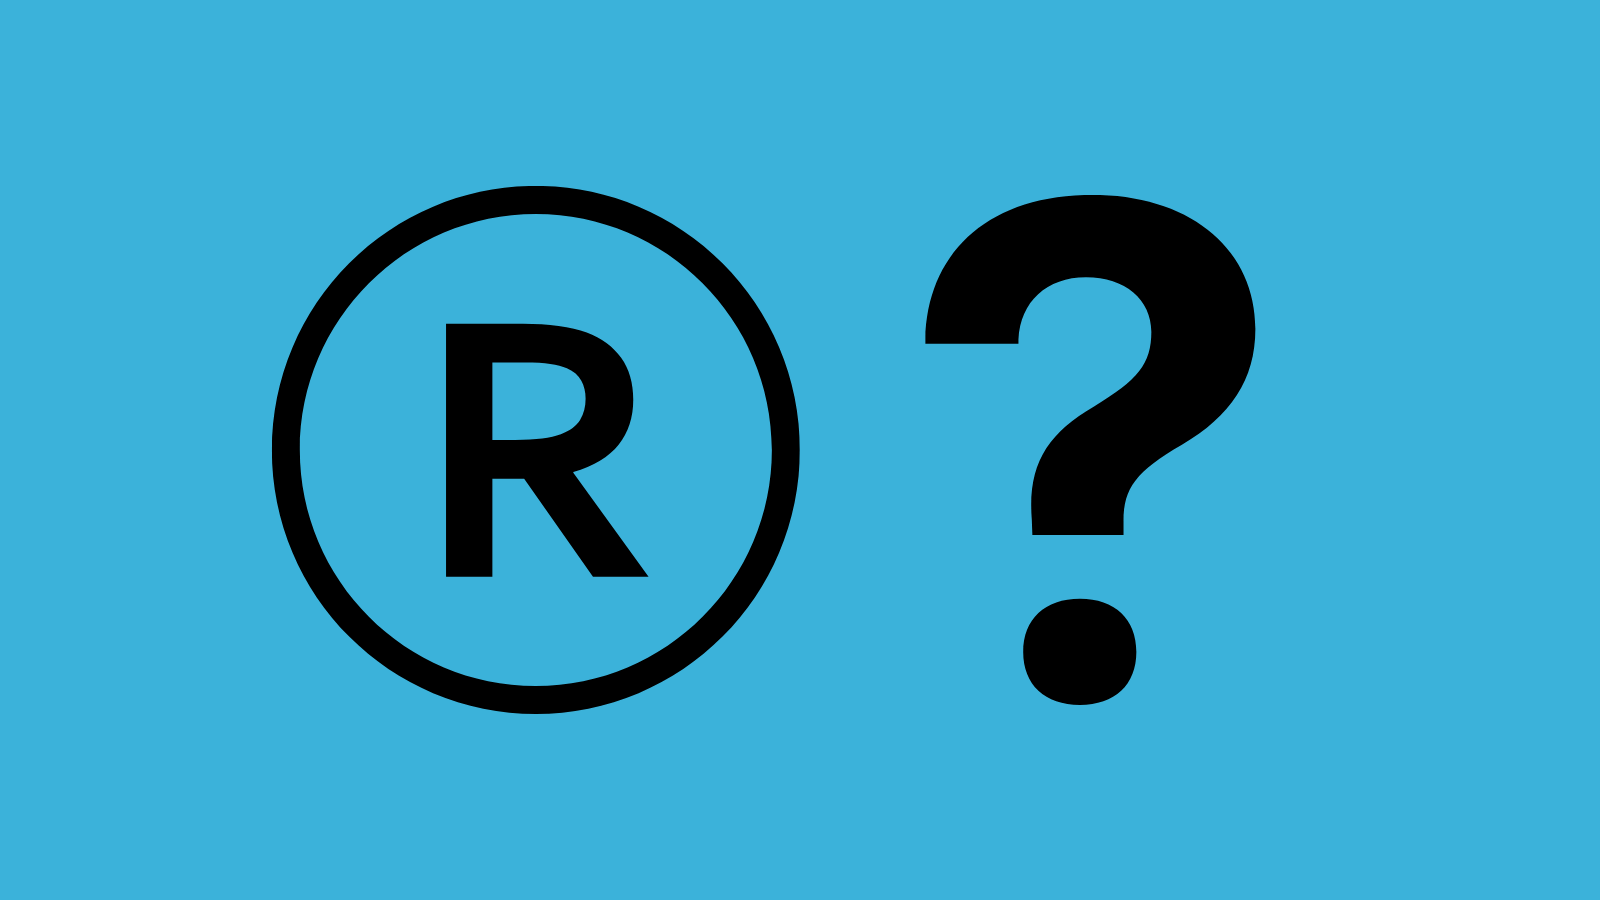 A Registered Trademark symbol and a question mark